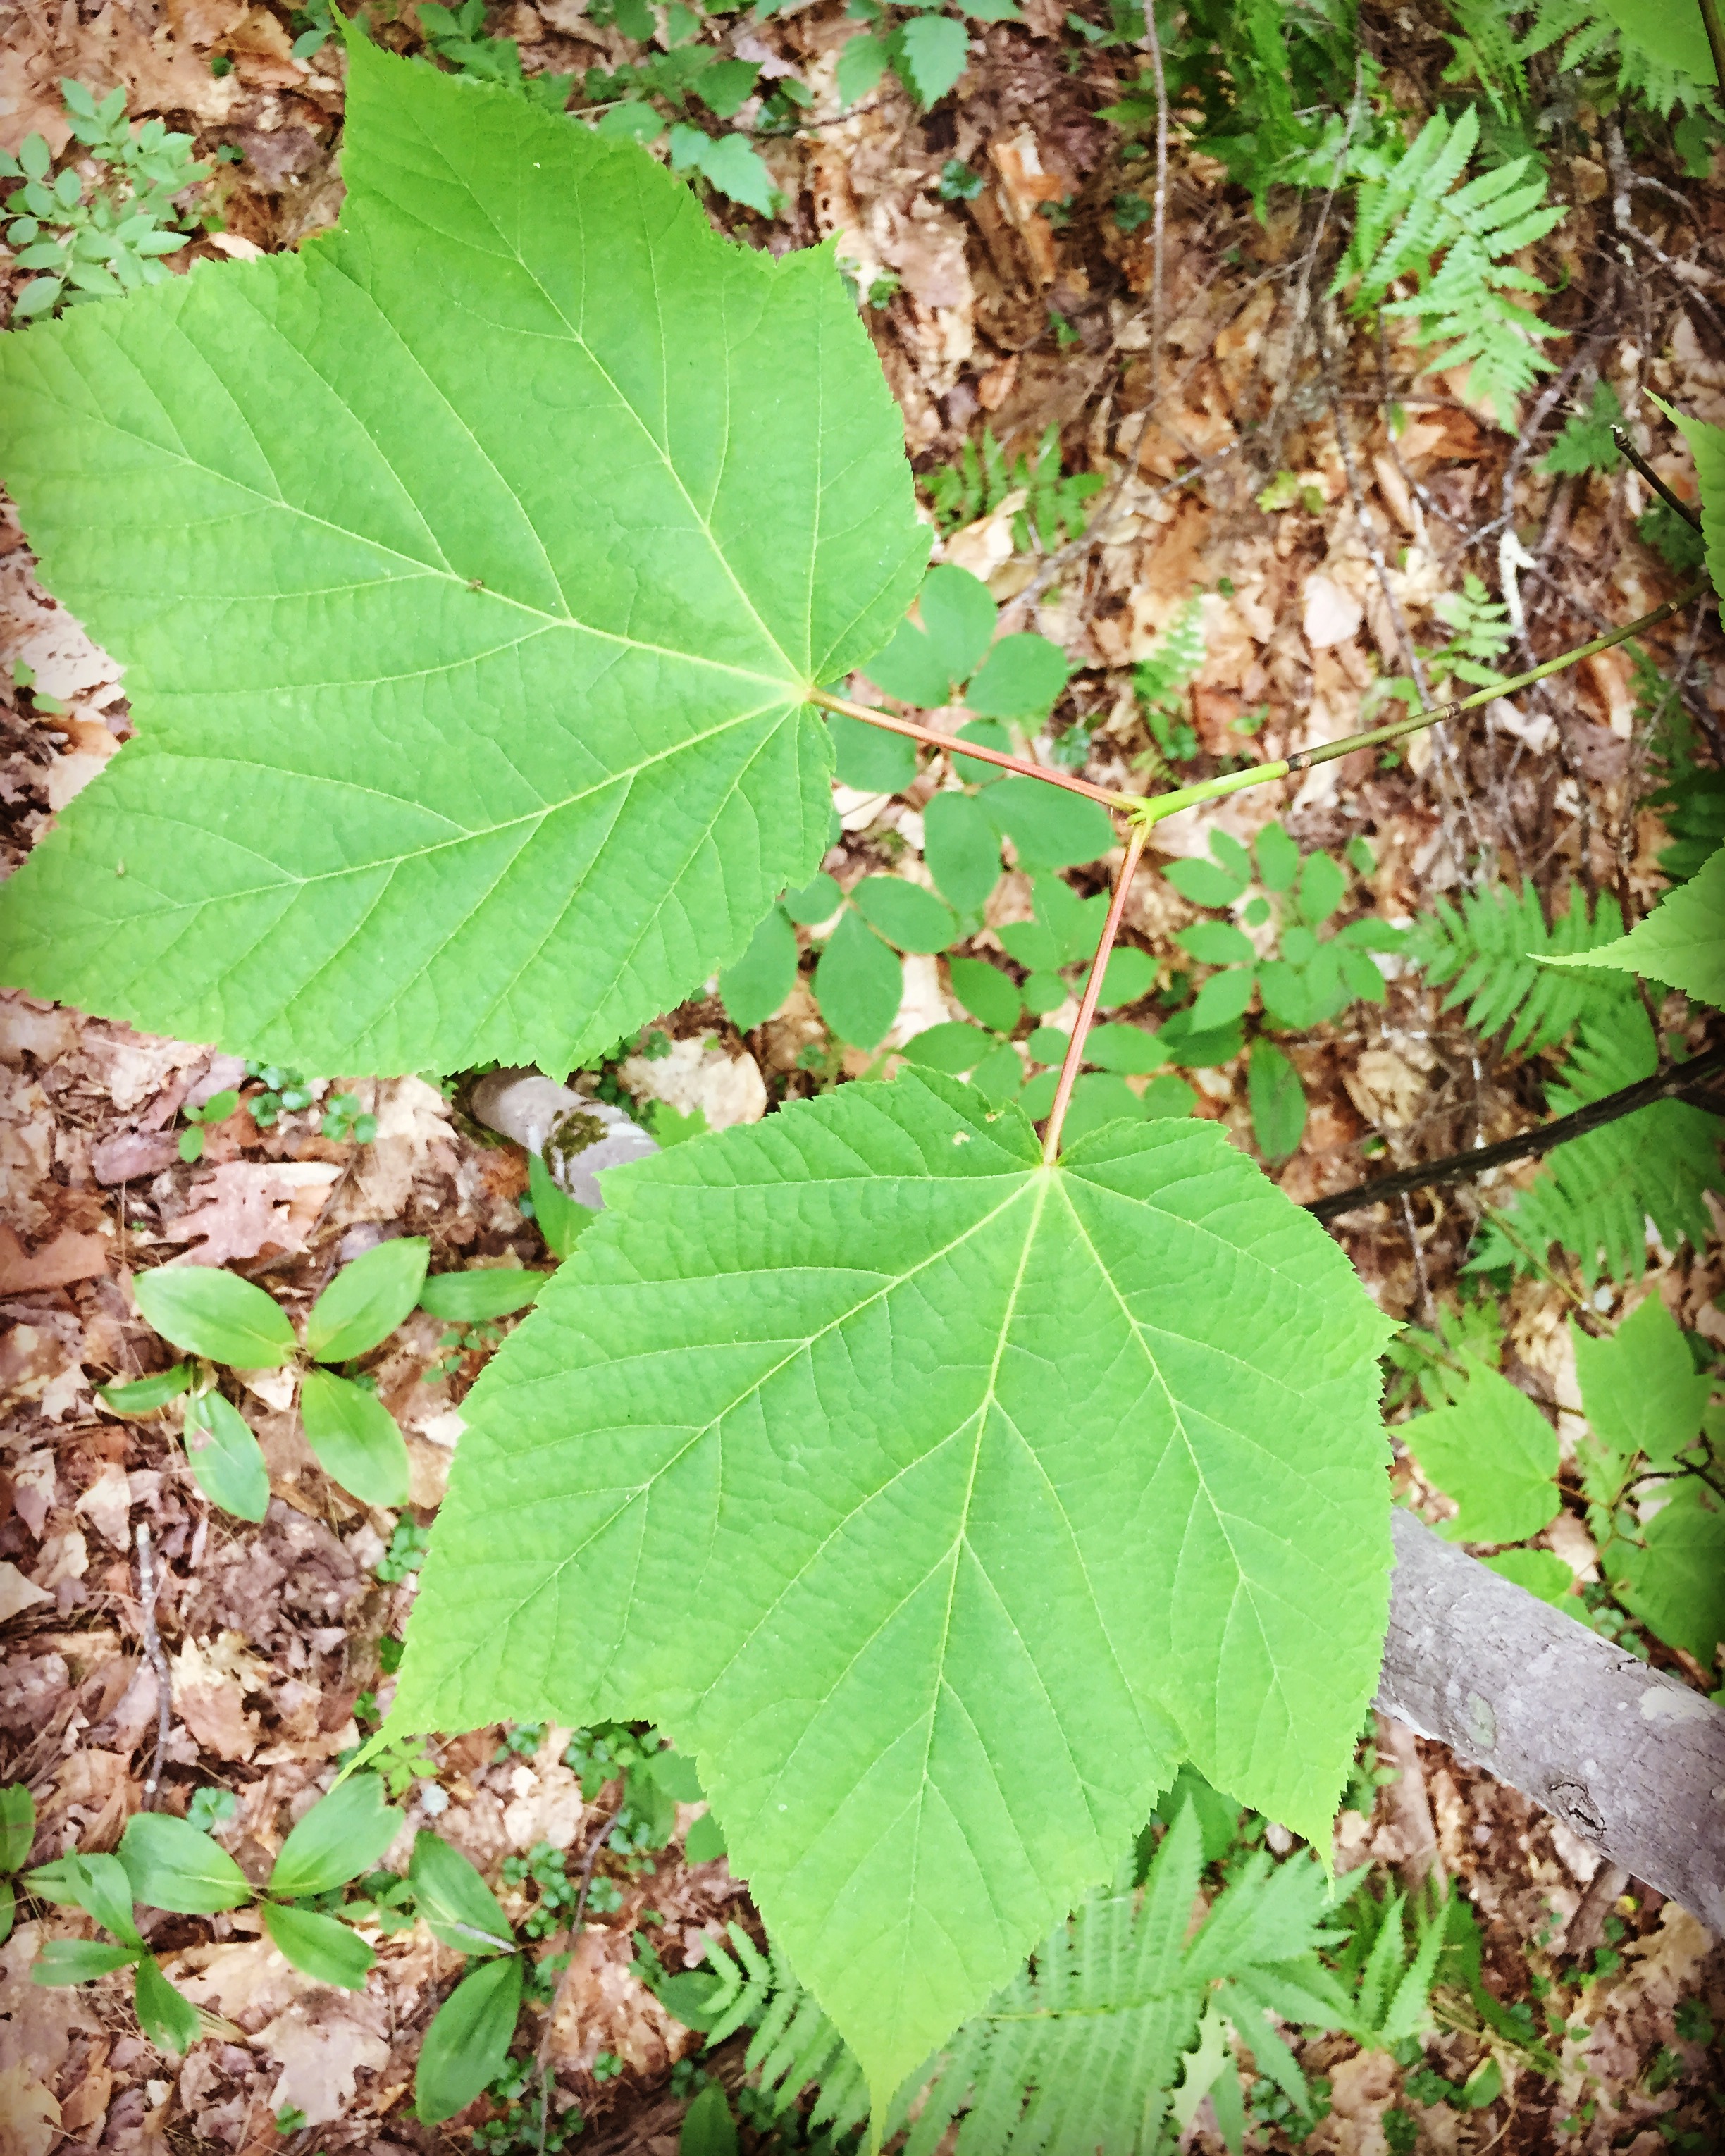  Here’s another understory tree growing nearby: moose maple. 